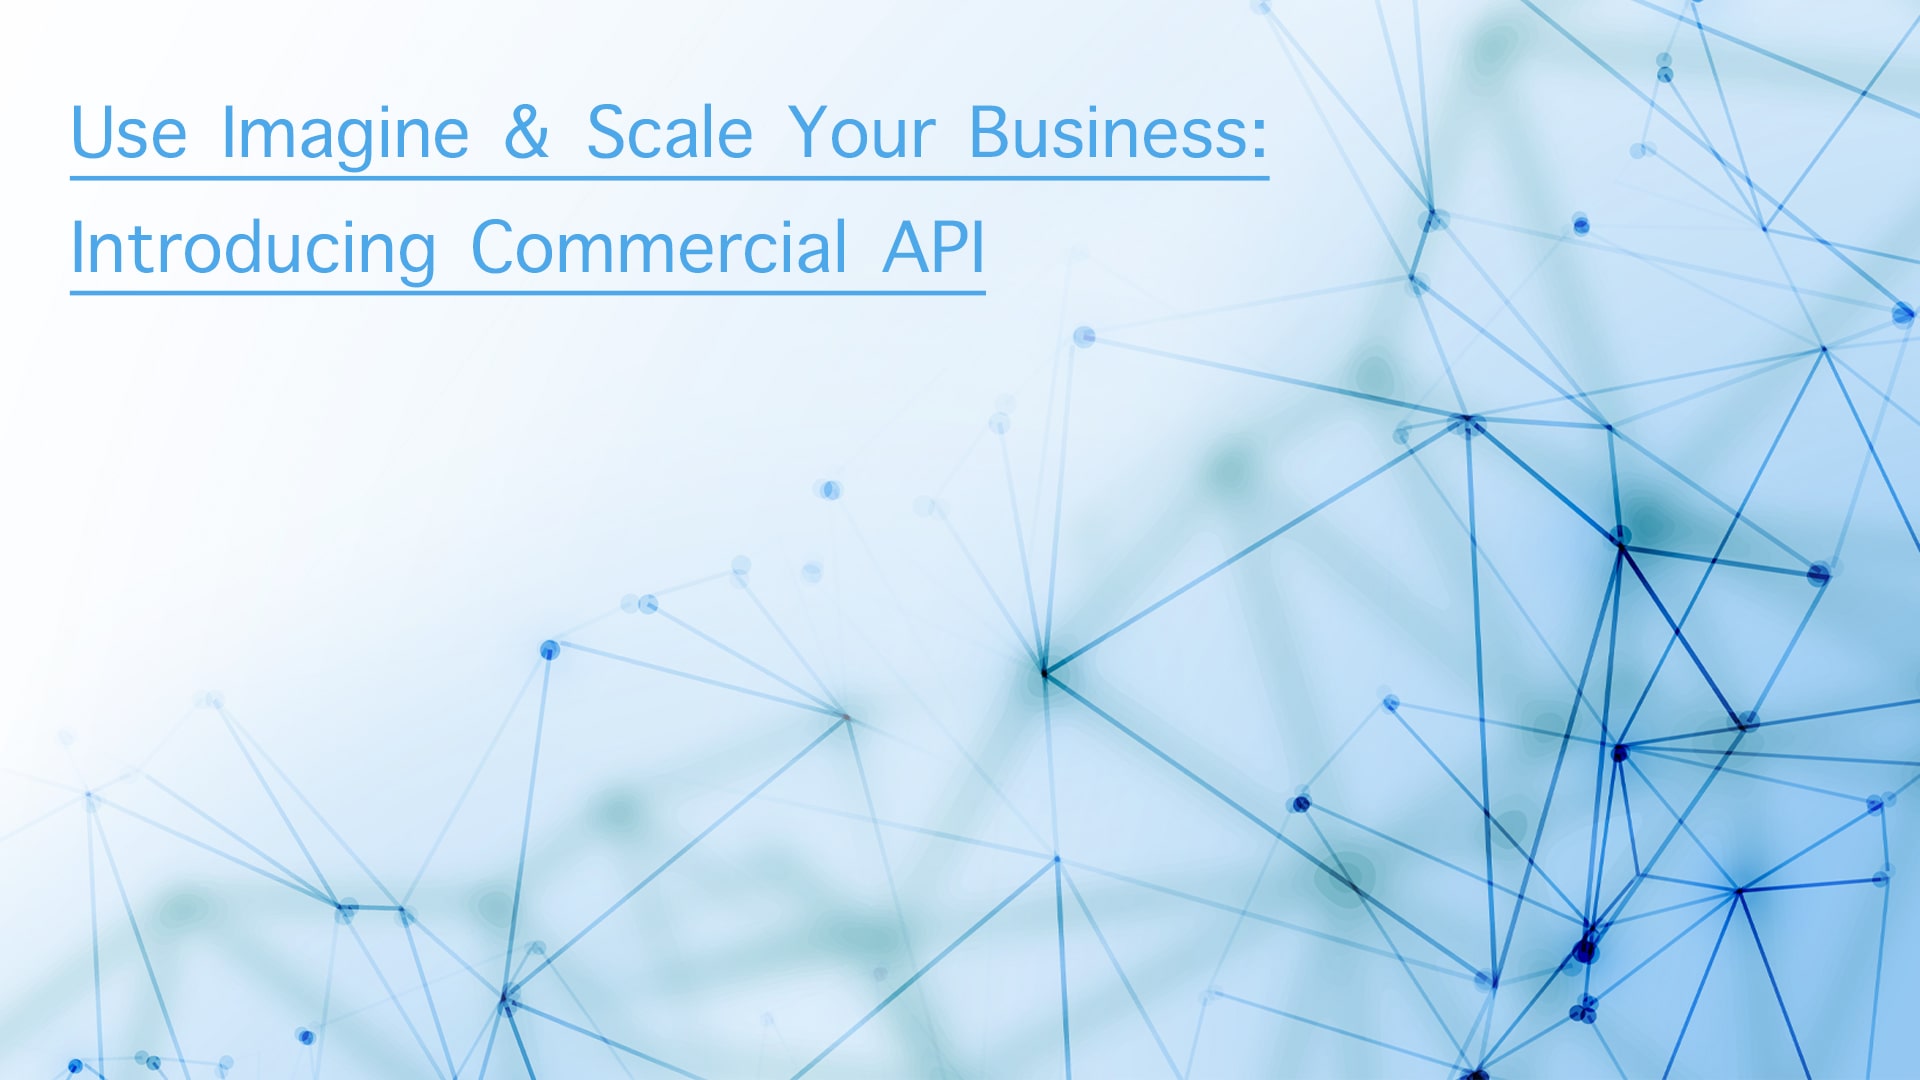 Use Imagine & Scale Your Business: Introducing Commercial API